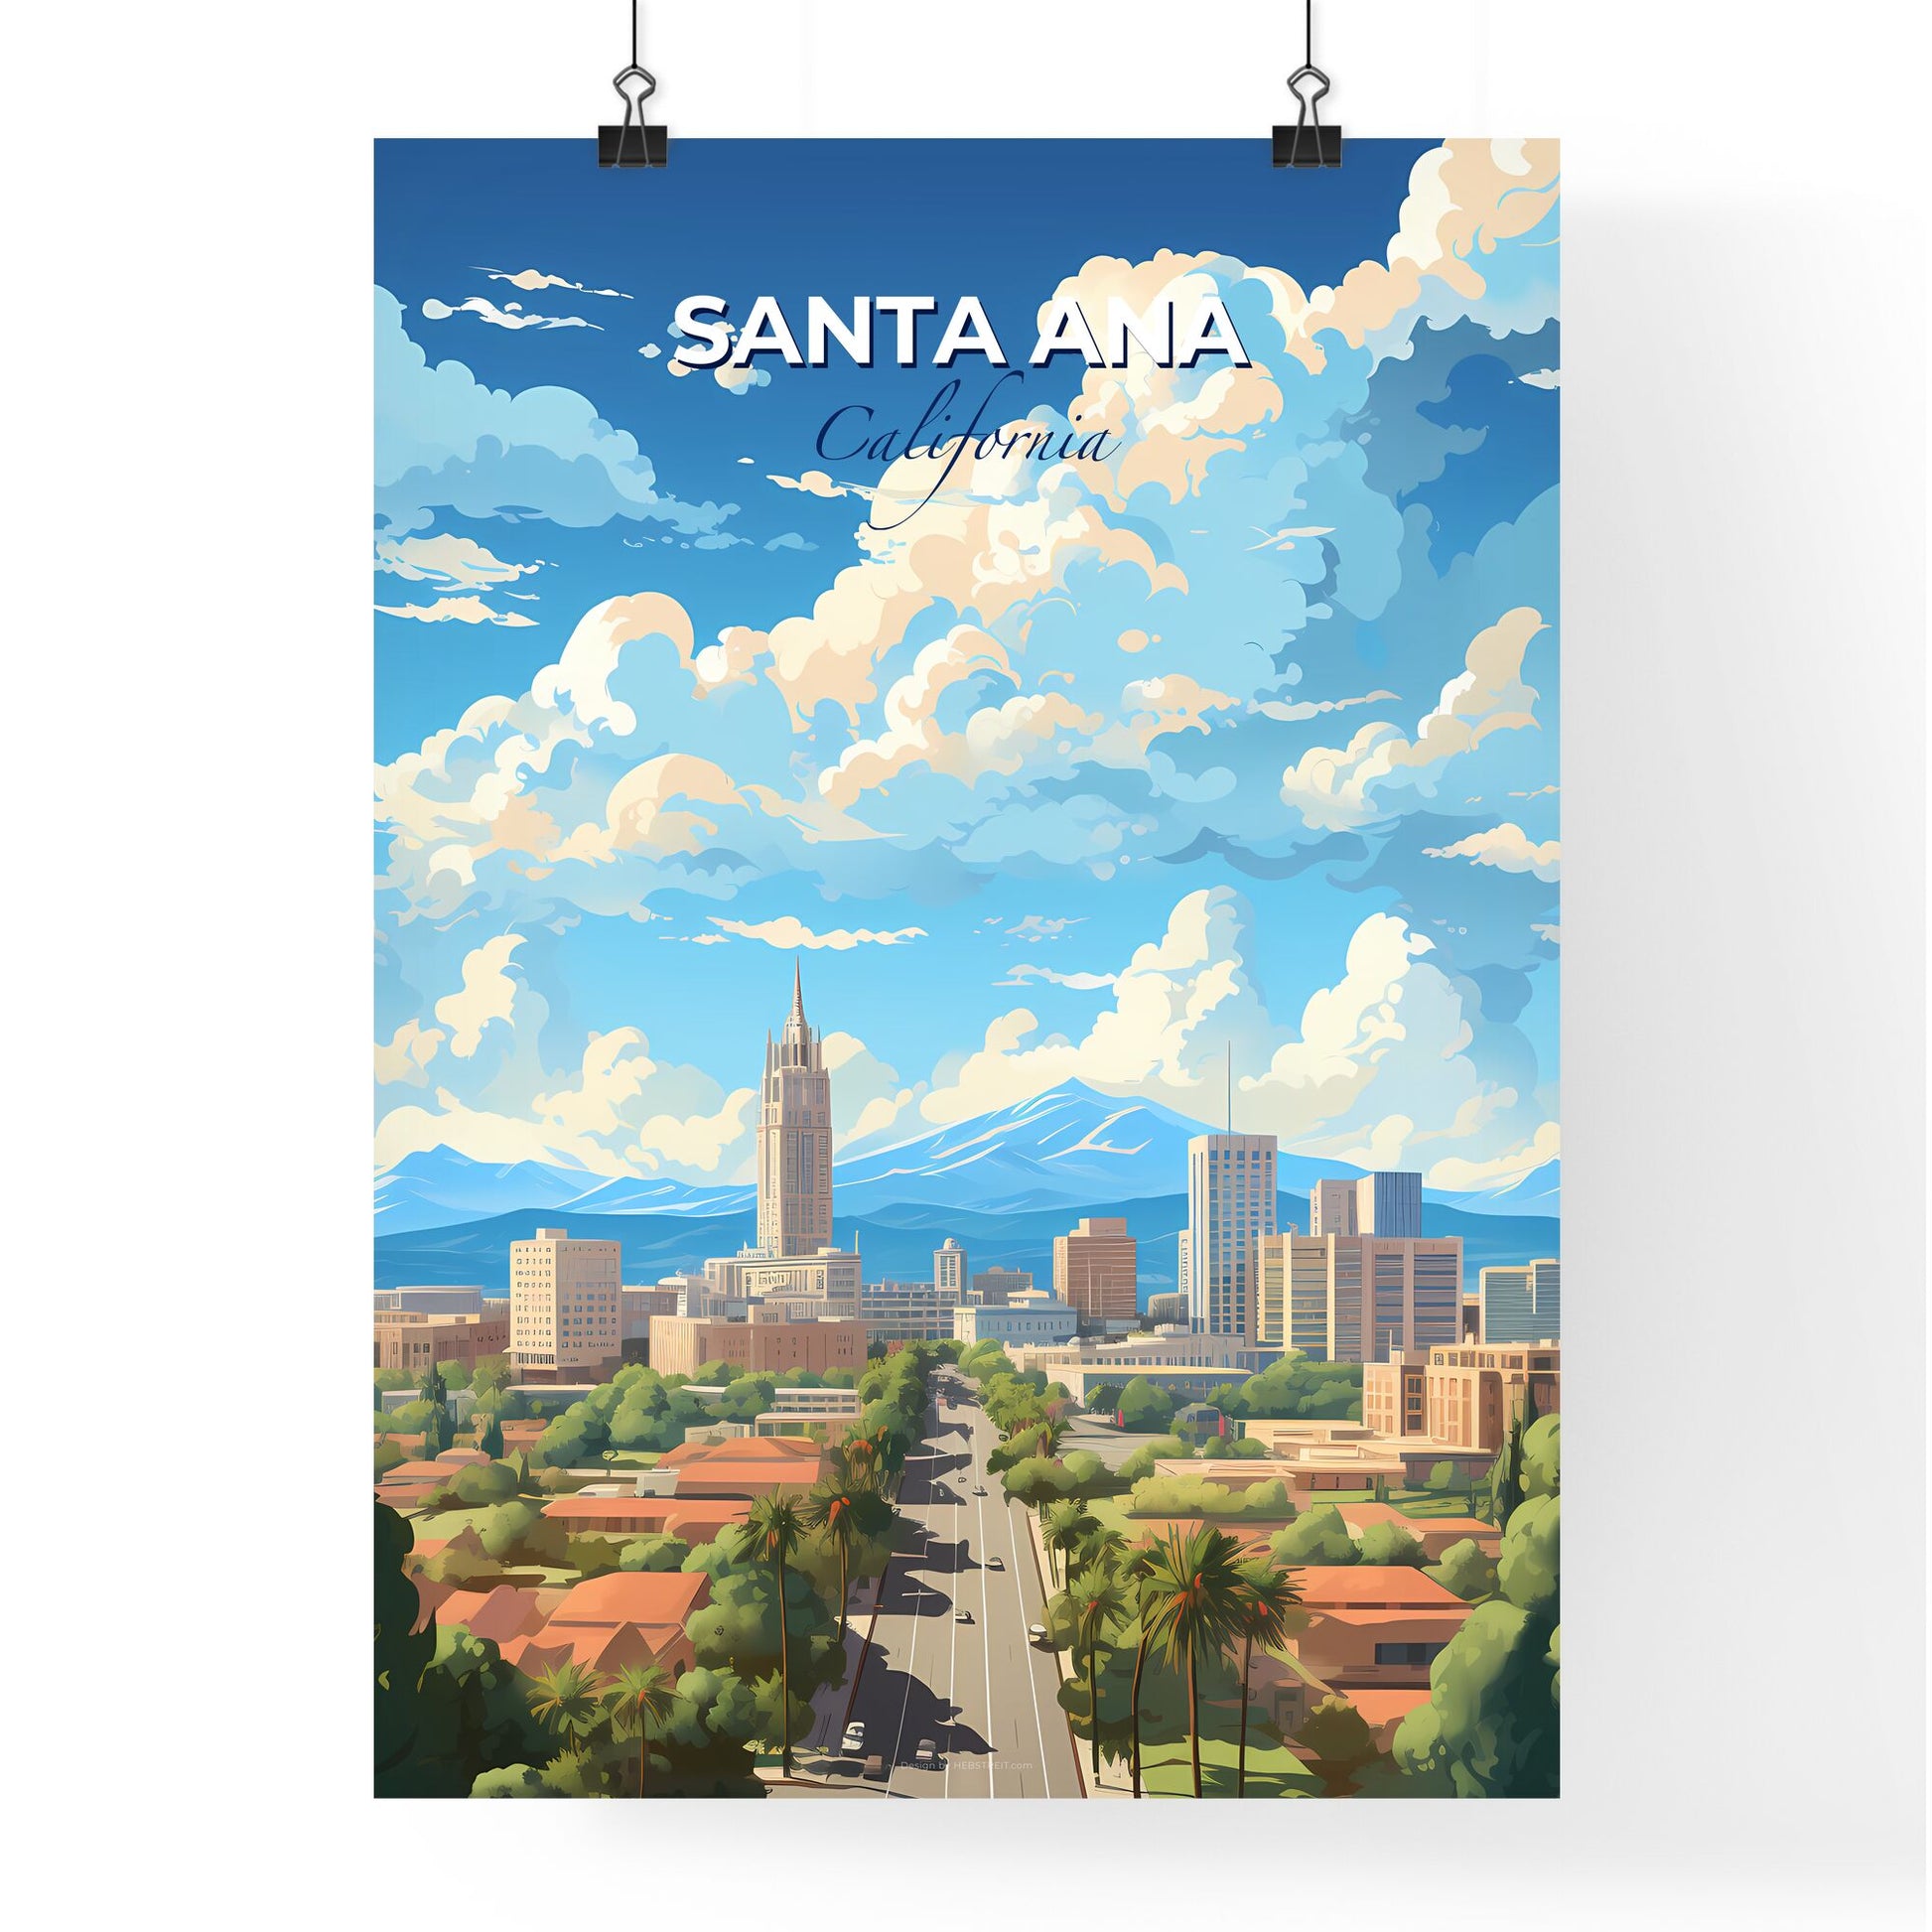 Santa Ana California Skyline - A City With Trees And Mountains In The Background - Customizable Travel Gift Default Title